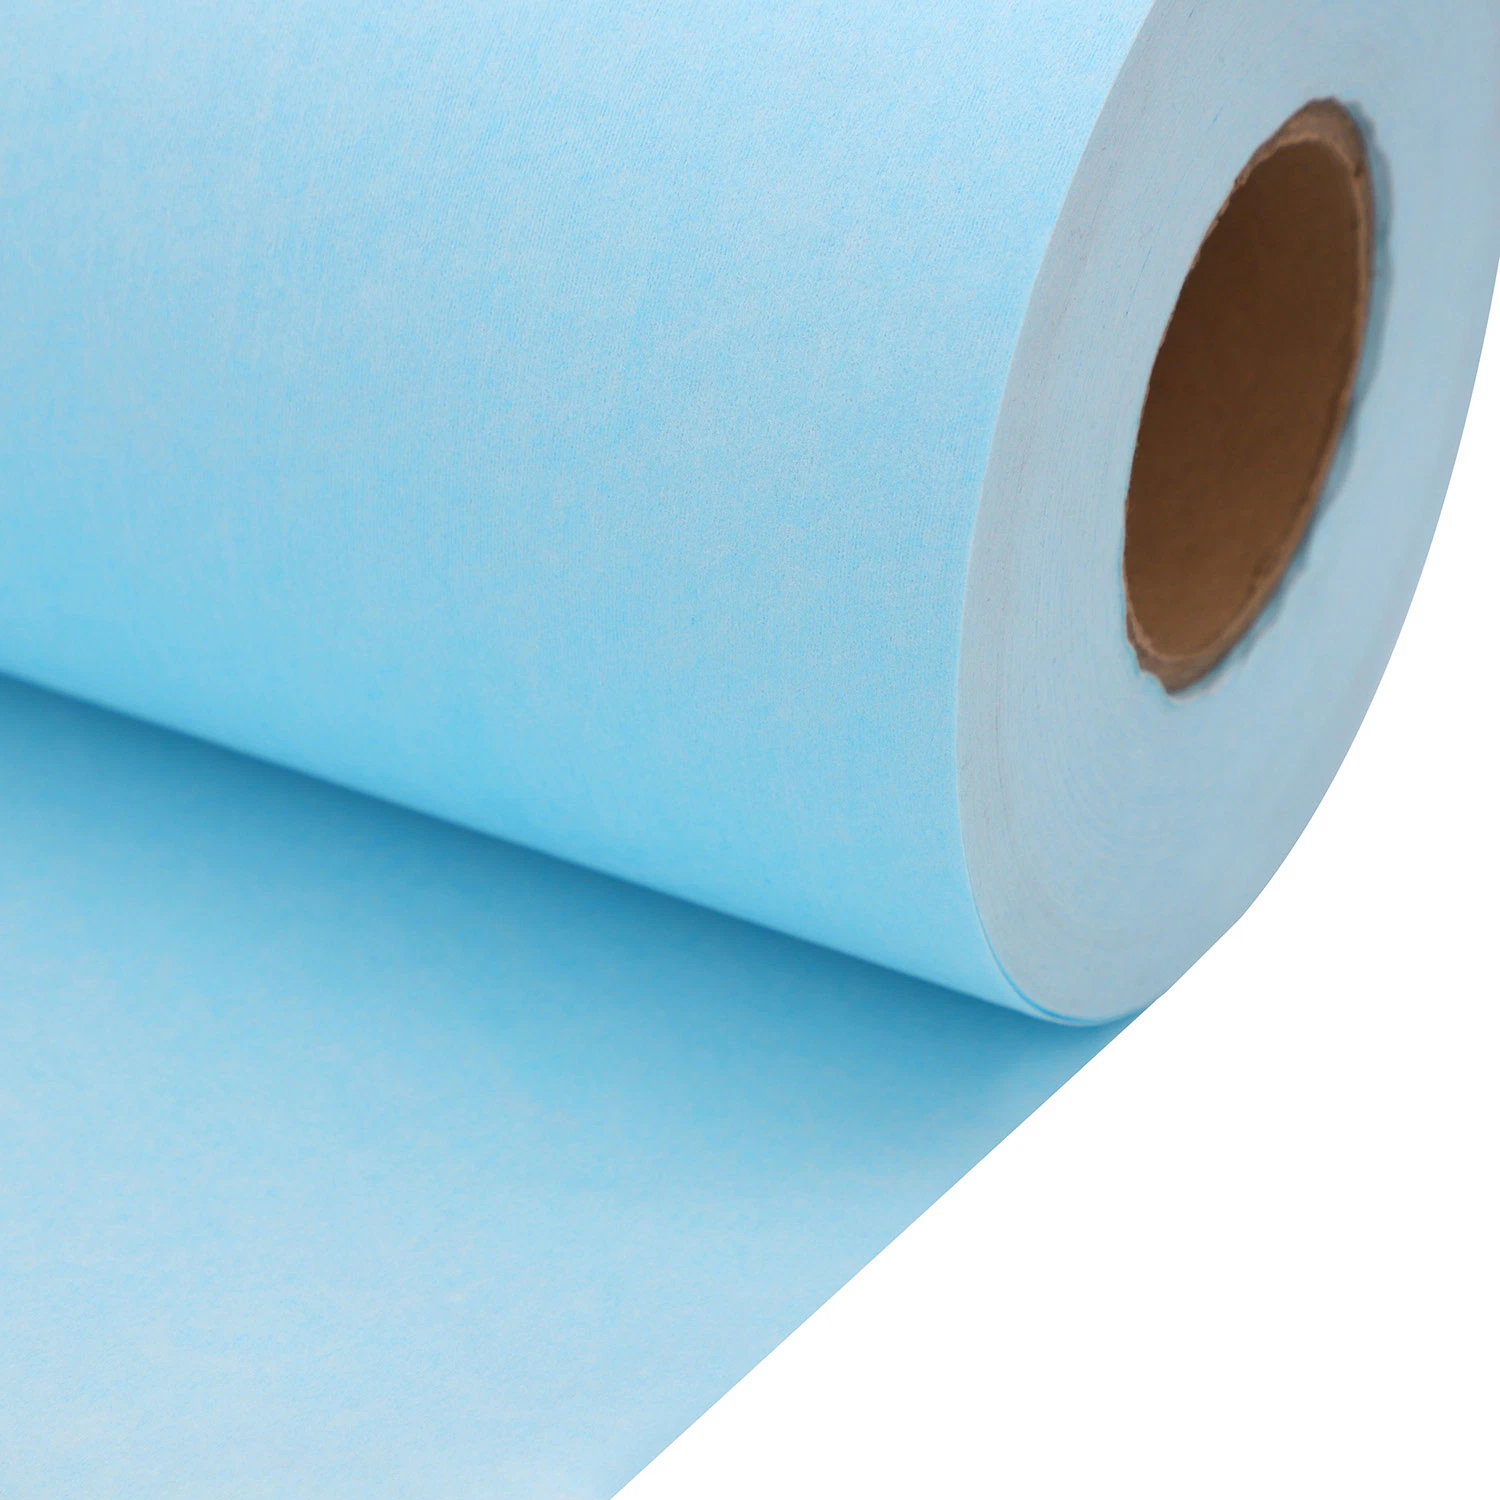 Hot Selling, Factory Supplied Environment-Friendly Biodegradable Pet&Woodpulp and PP&Woodpulp Spunlace Nonwoven Fabric